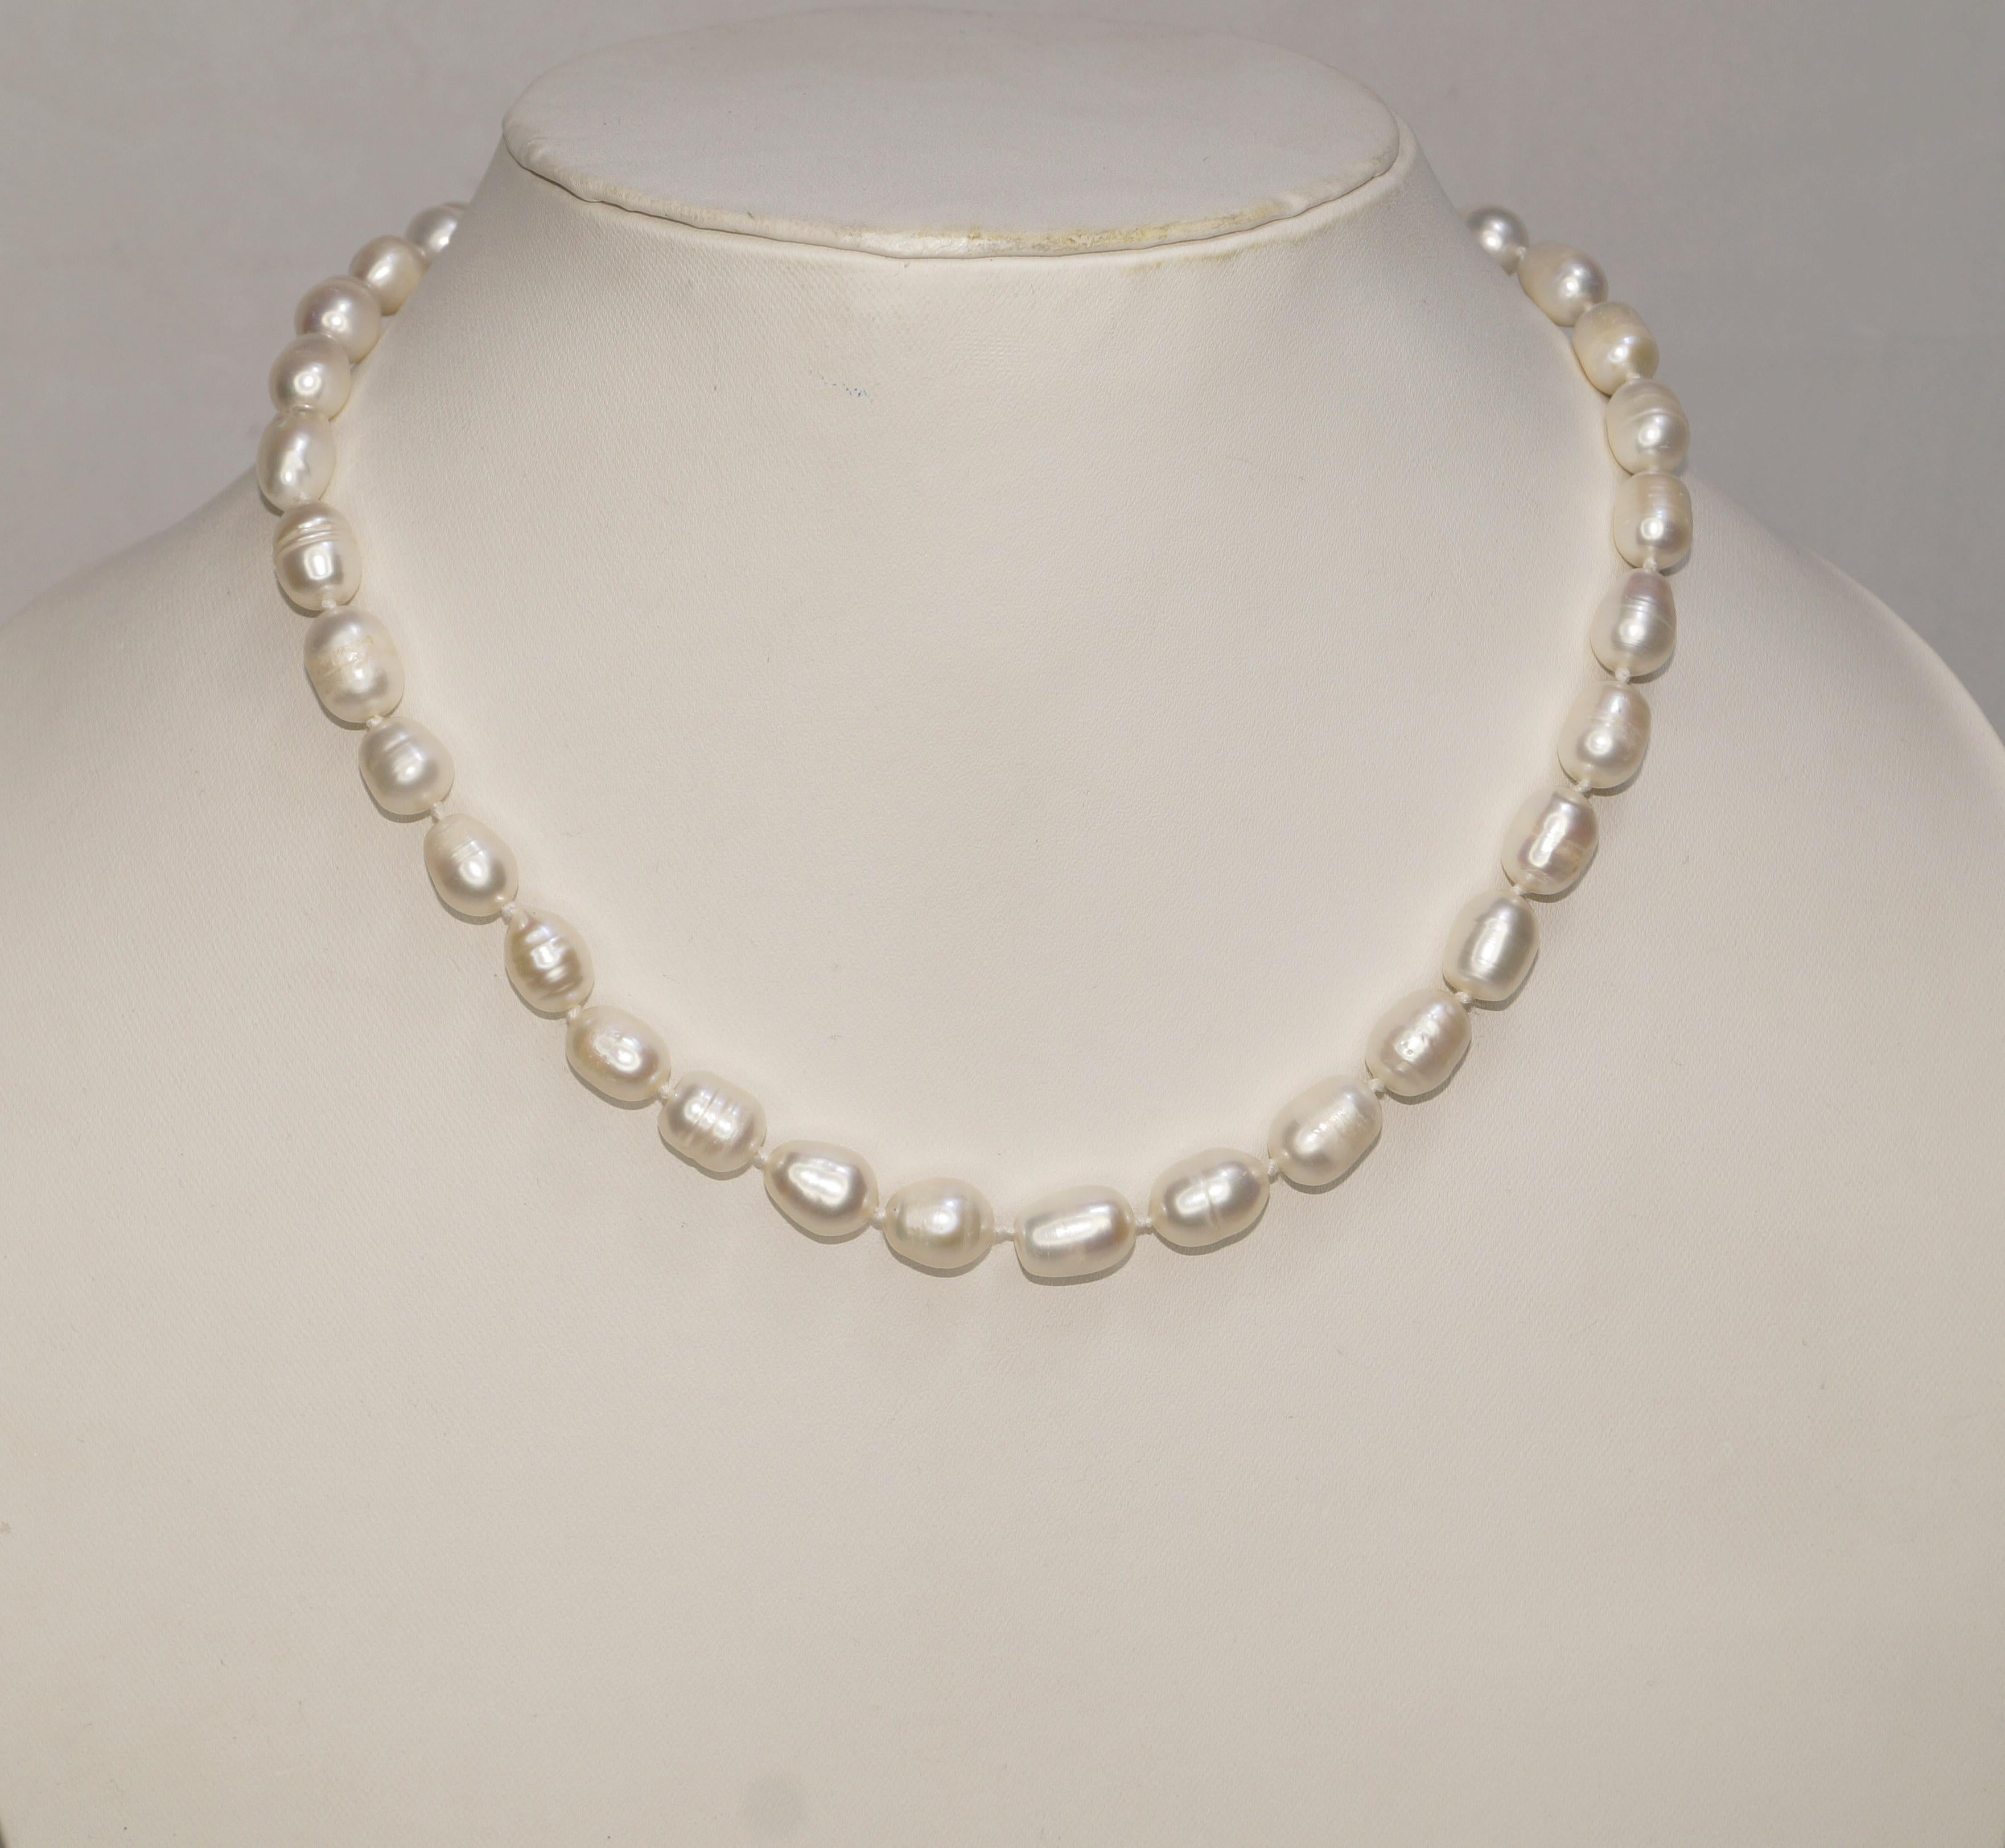 Details:
: 14k Yellow Gold Lock South Sea pearl beads Necklace.

: Item no- KM46/200/9875

:Pearl Size: 10mmx12mm (Approx.)

:Necklace length: 18